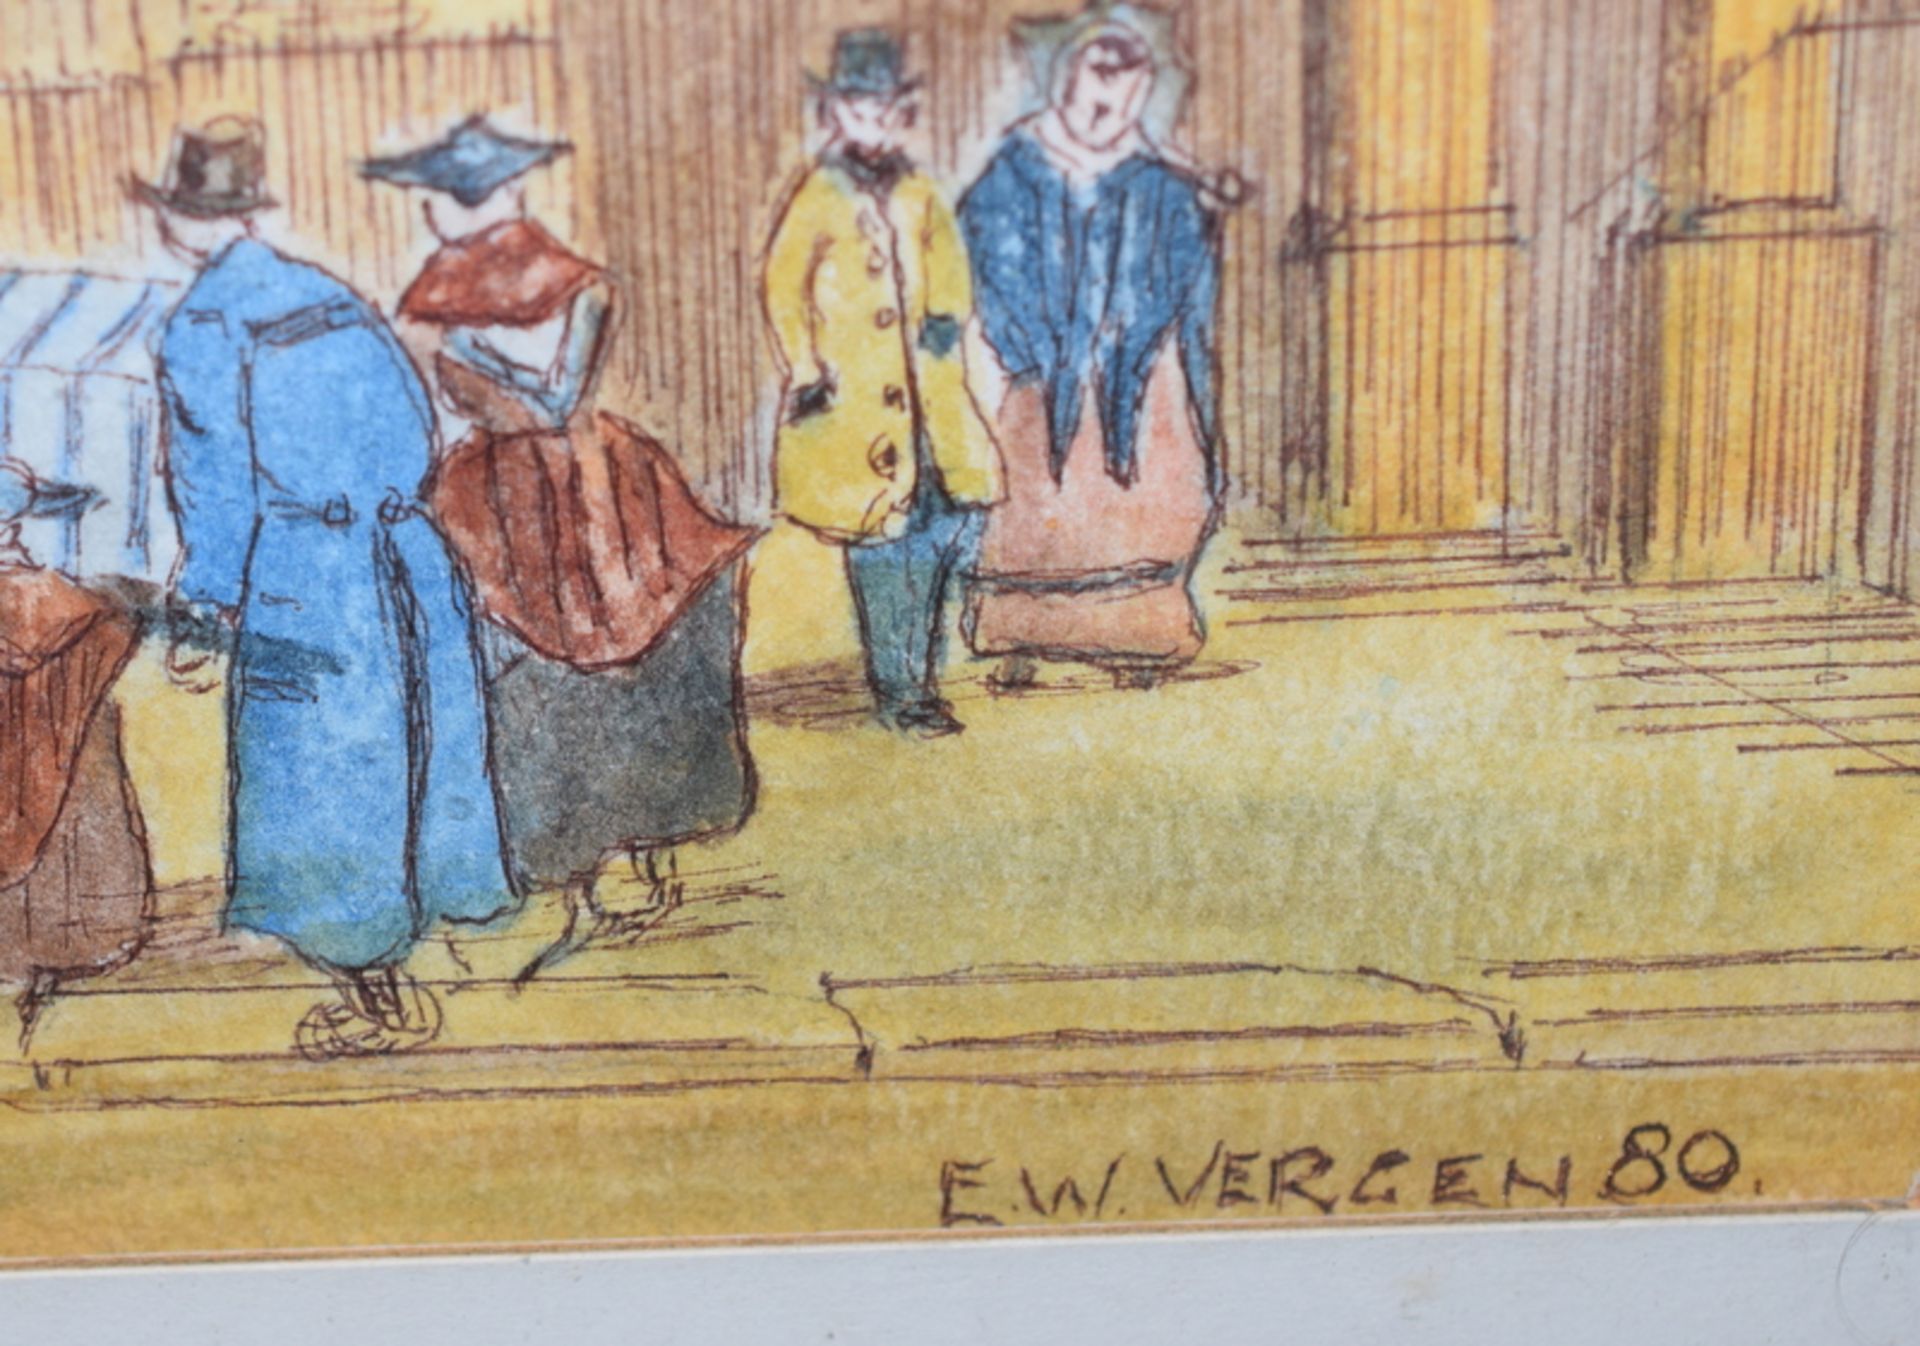 Pen And Watercolour Painting Of Street Scene By E.W.Vergan 80 - Image 3 of 3